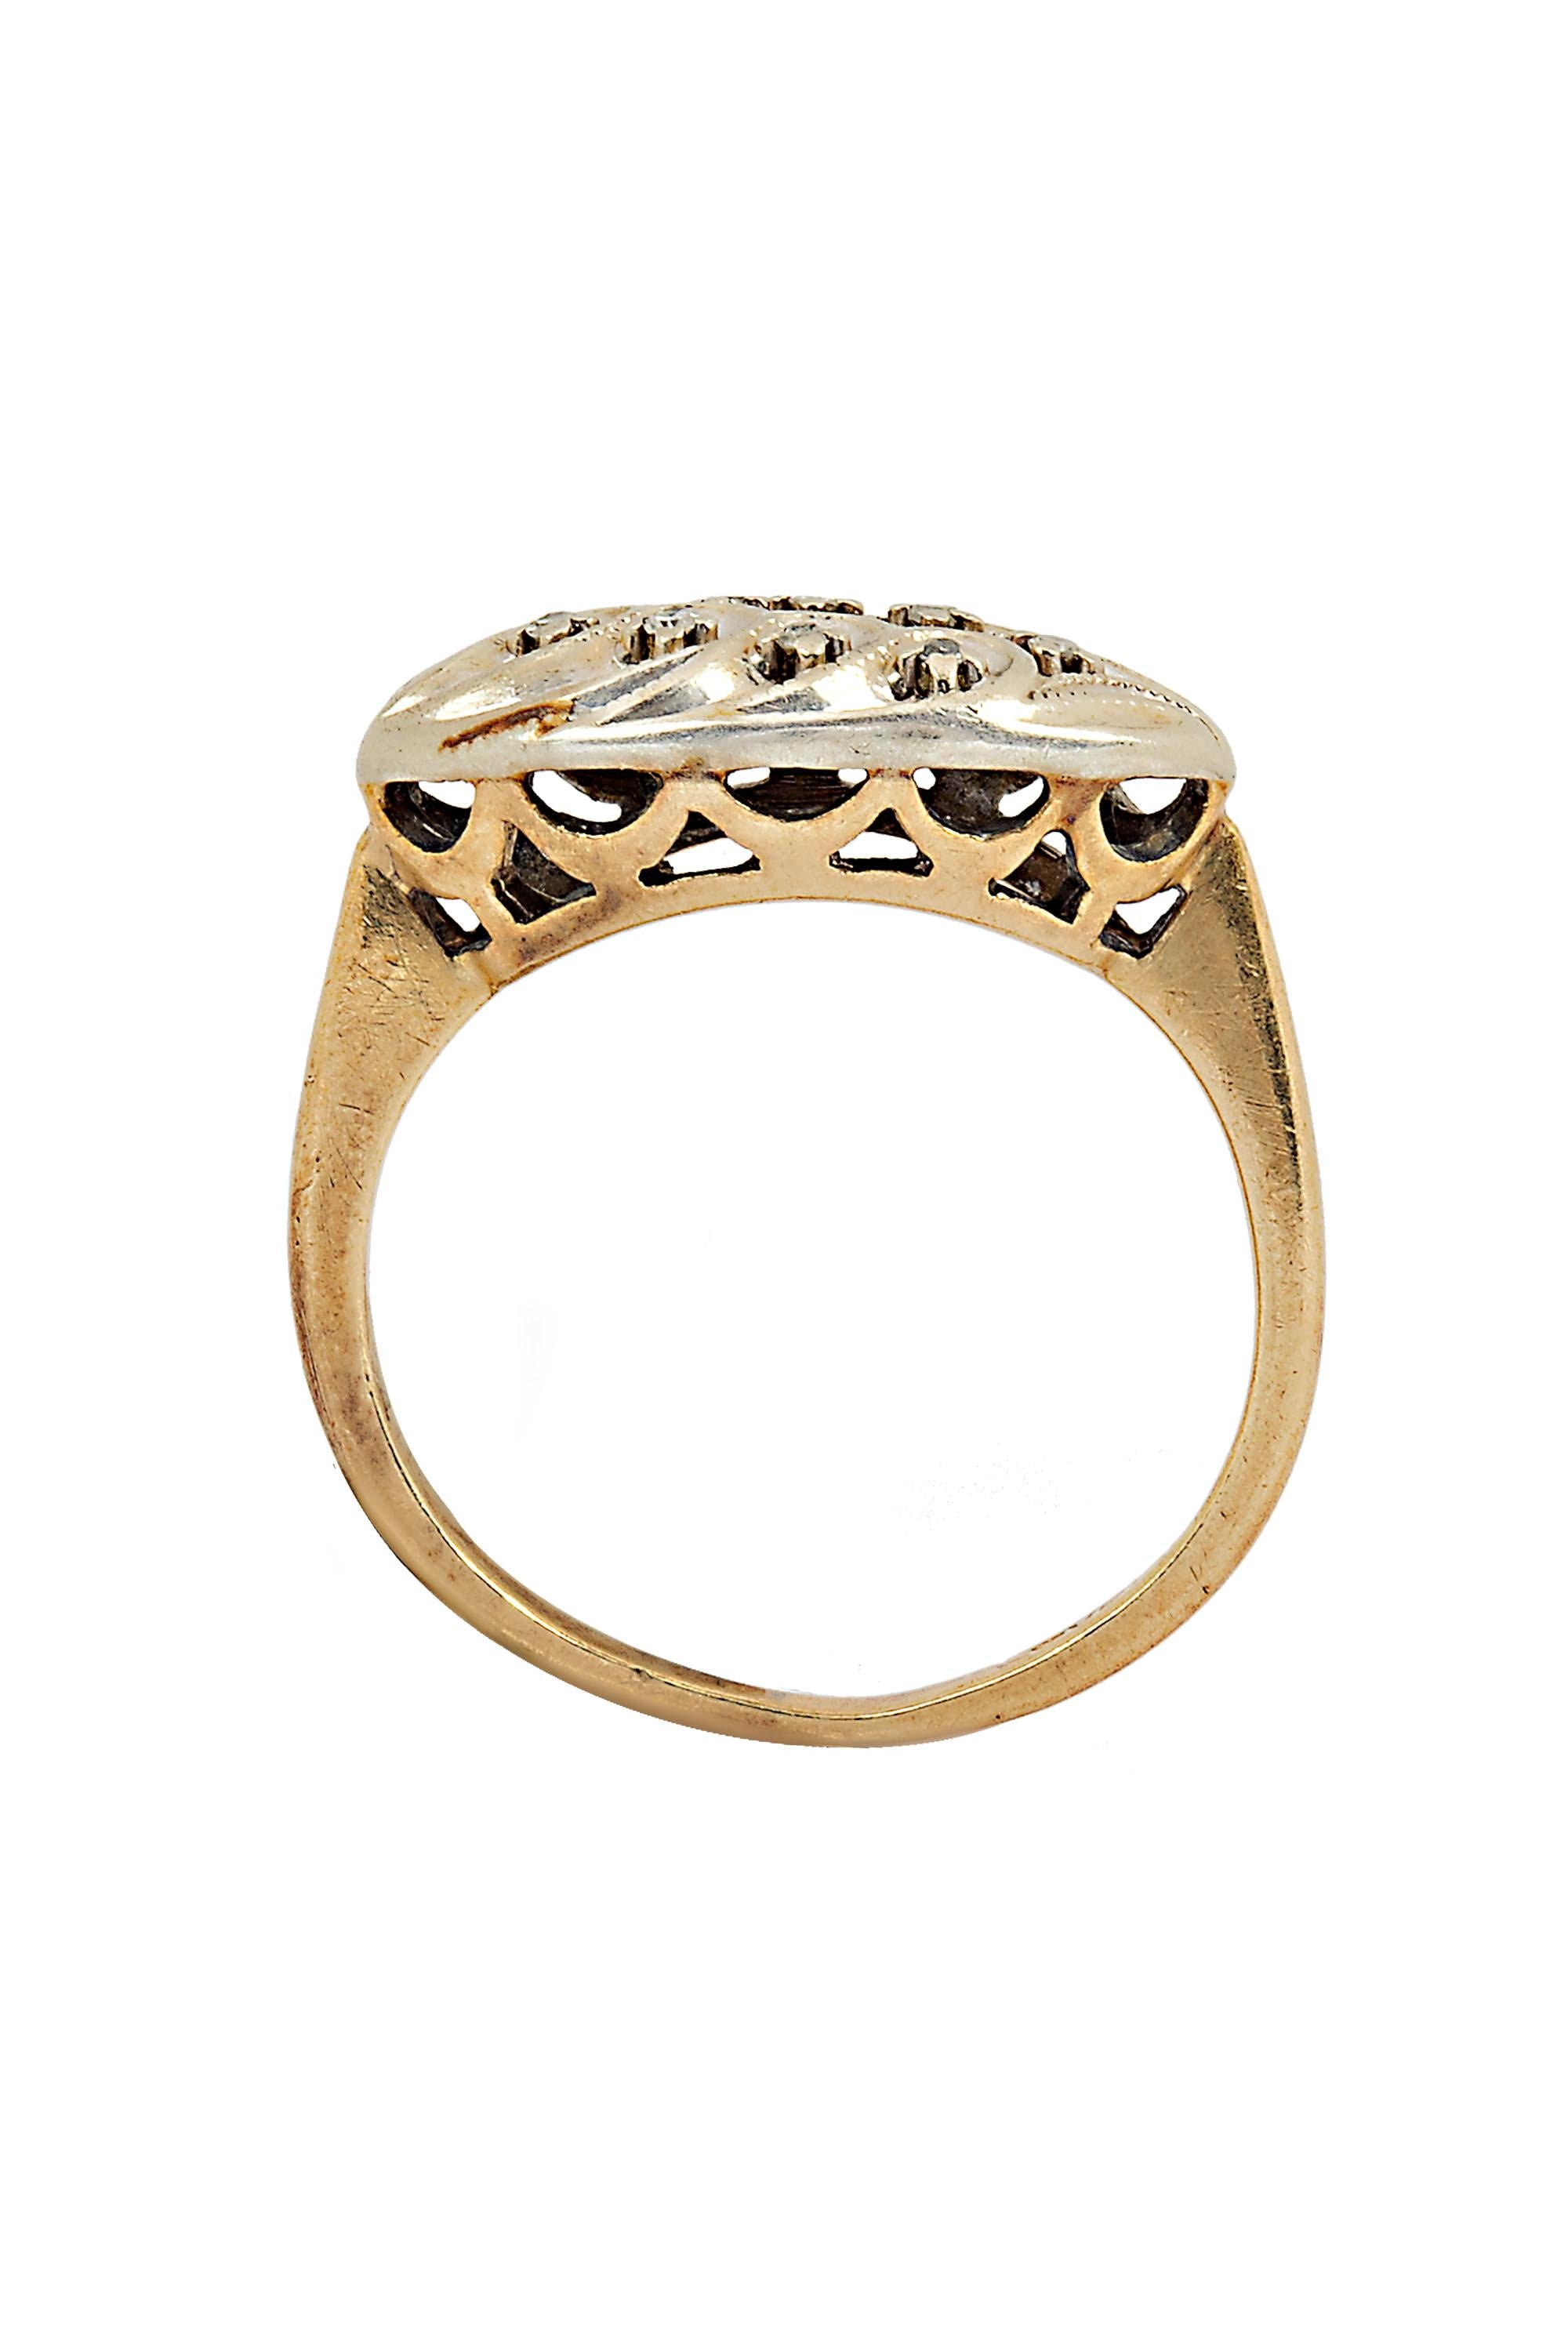 This romantic ring features a navette of eight round diamonds sparkling from within waves of sculpted white gold sitting atop an open work gallery of scalloped yellow gold. Crafted in 14 karat white and yellow gold with a total diamond weight of .08